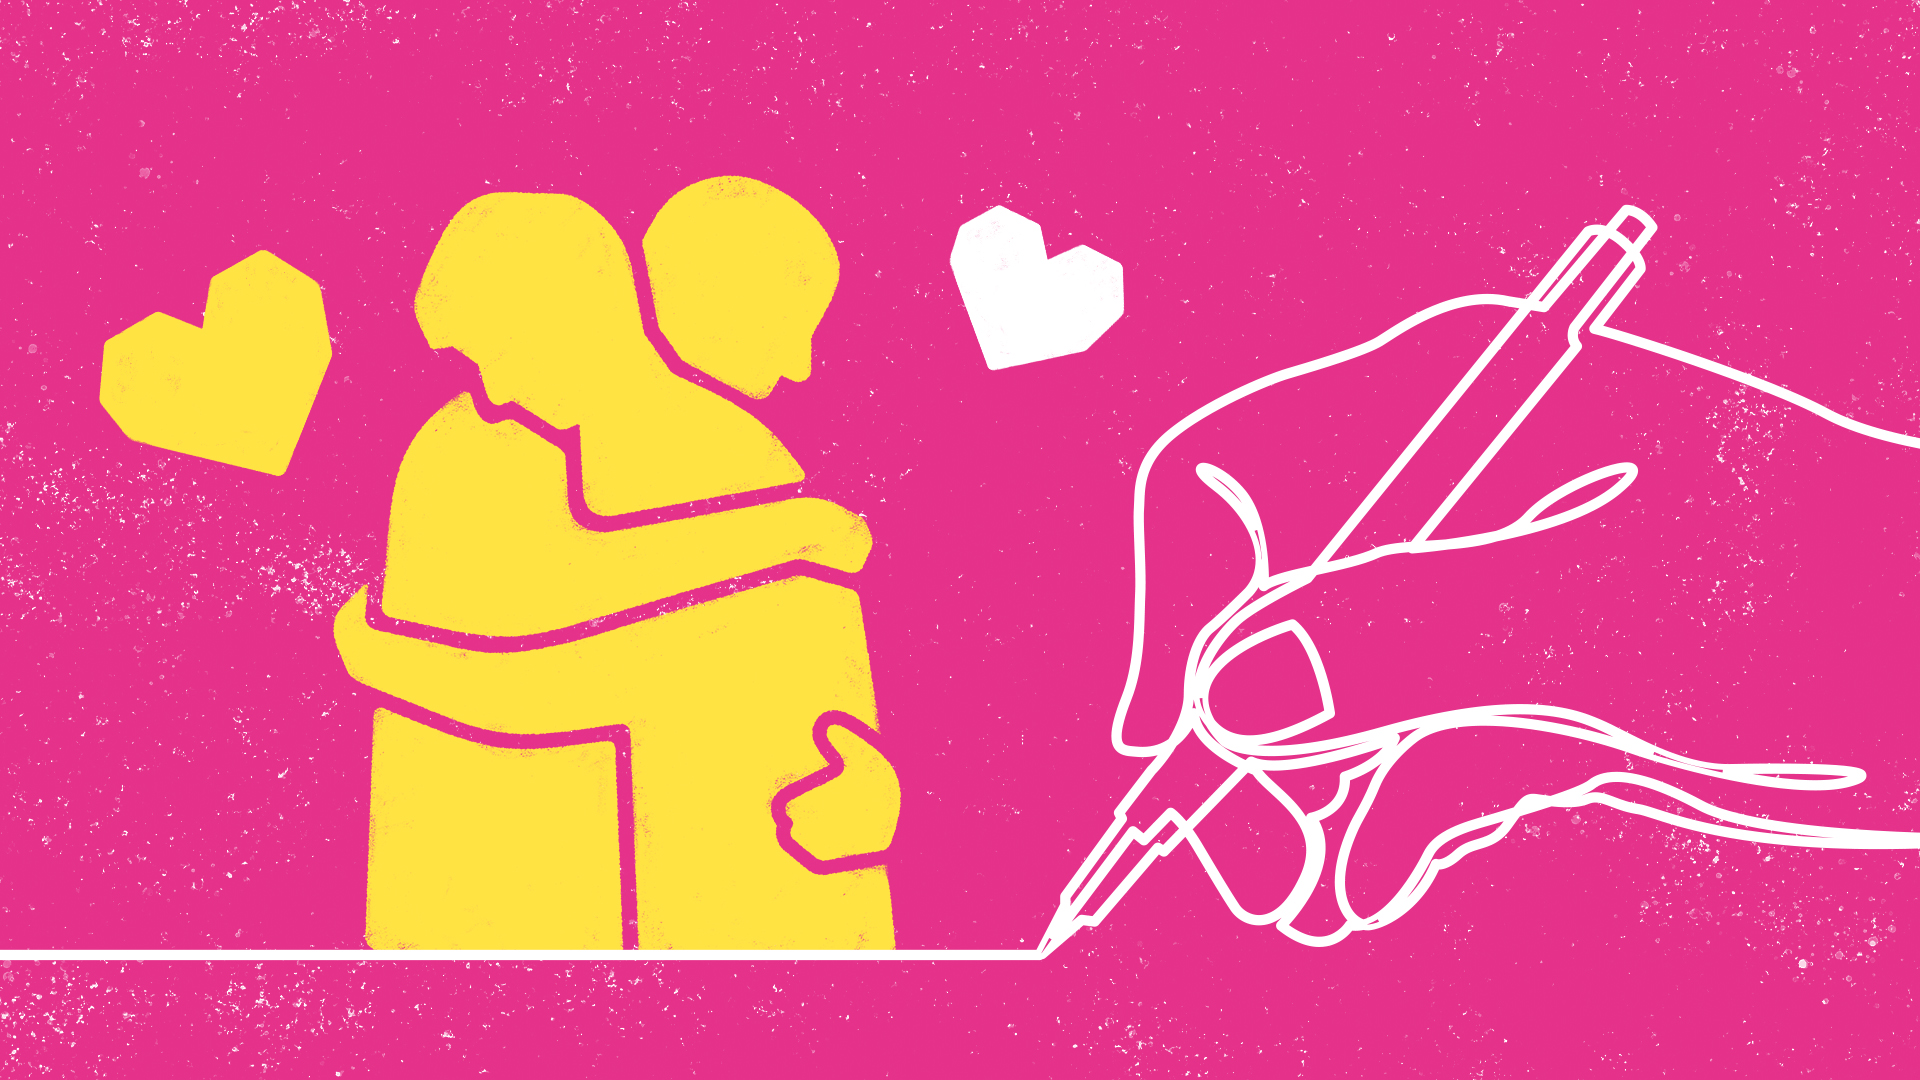 Pink and yellow graphic of two figures hugging, with a white outline of a hand writing.